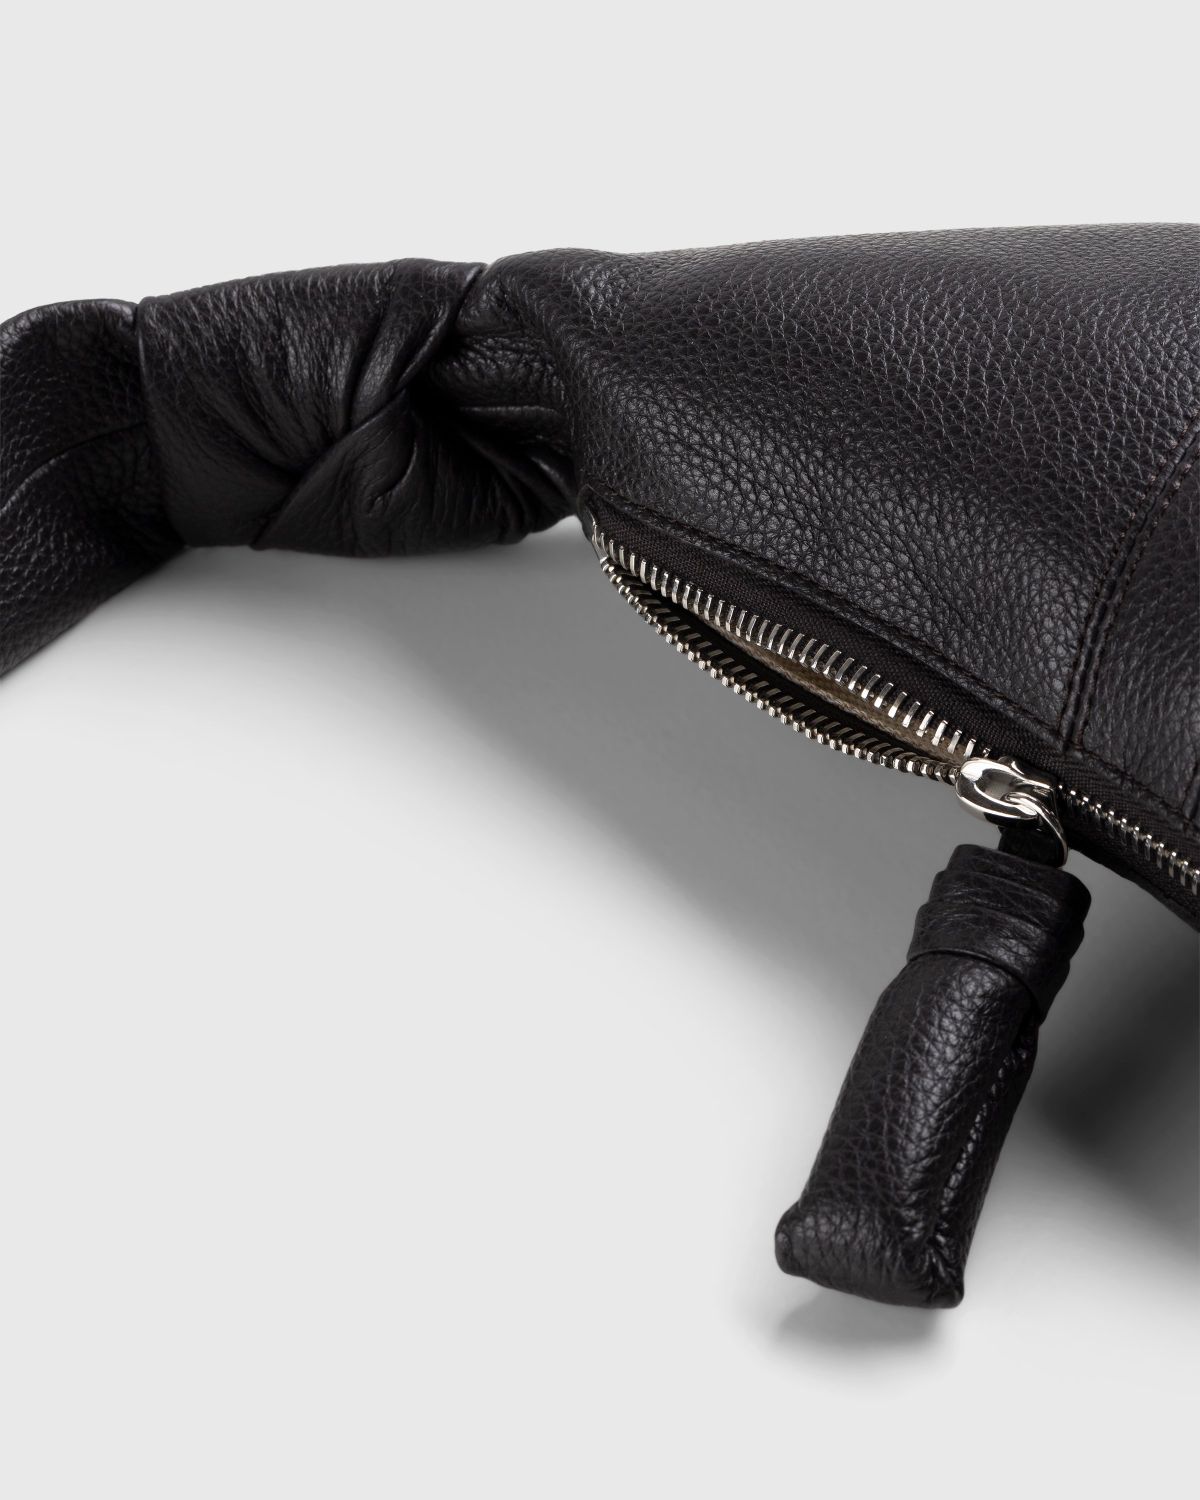 Dark Chocolate Medium Croissant Bag in Soft Nappa Leather | LEMAIRE